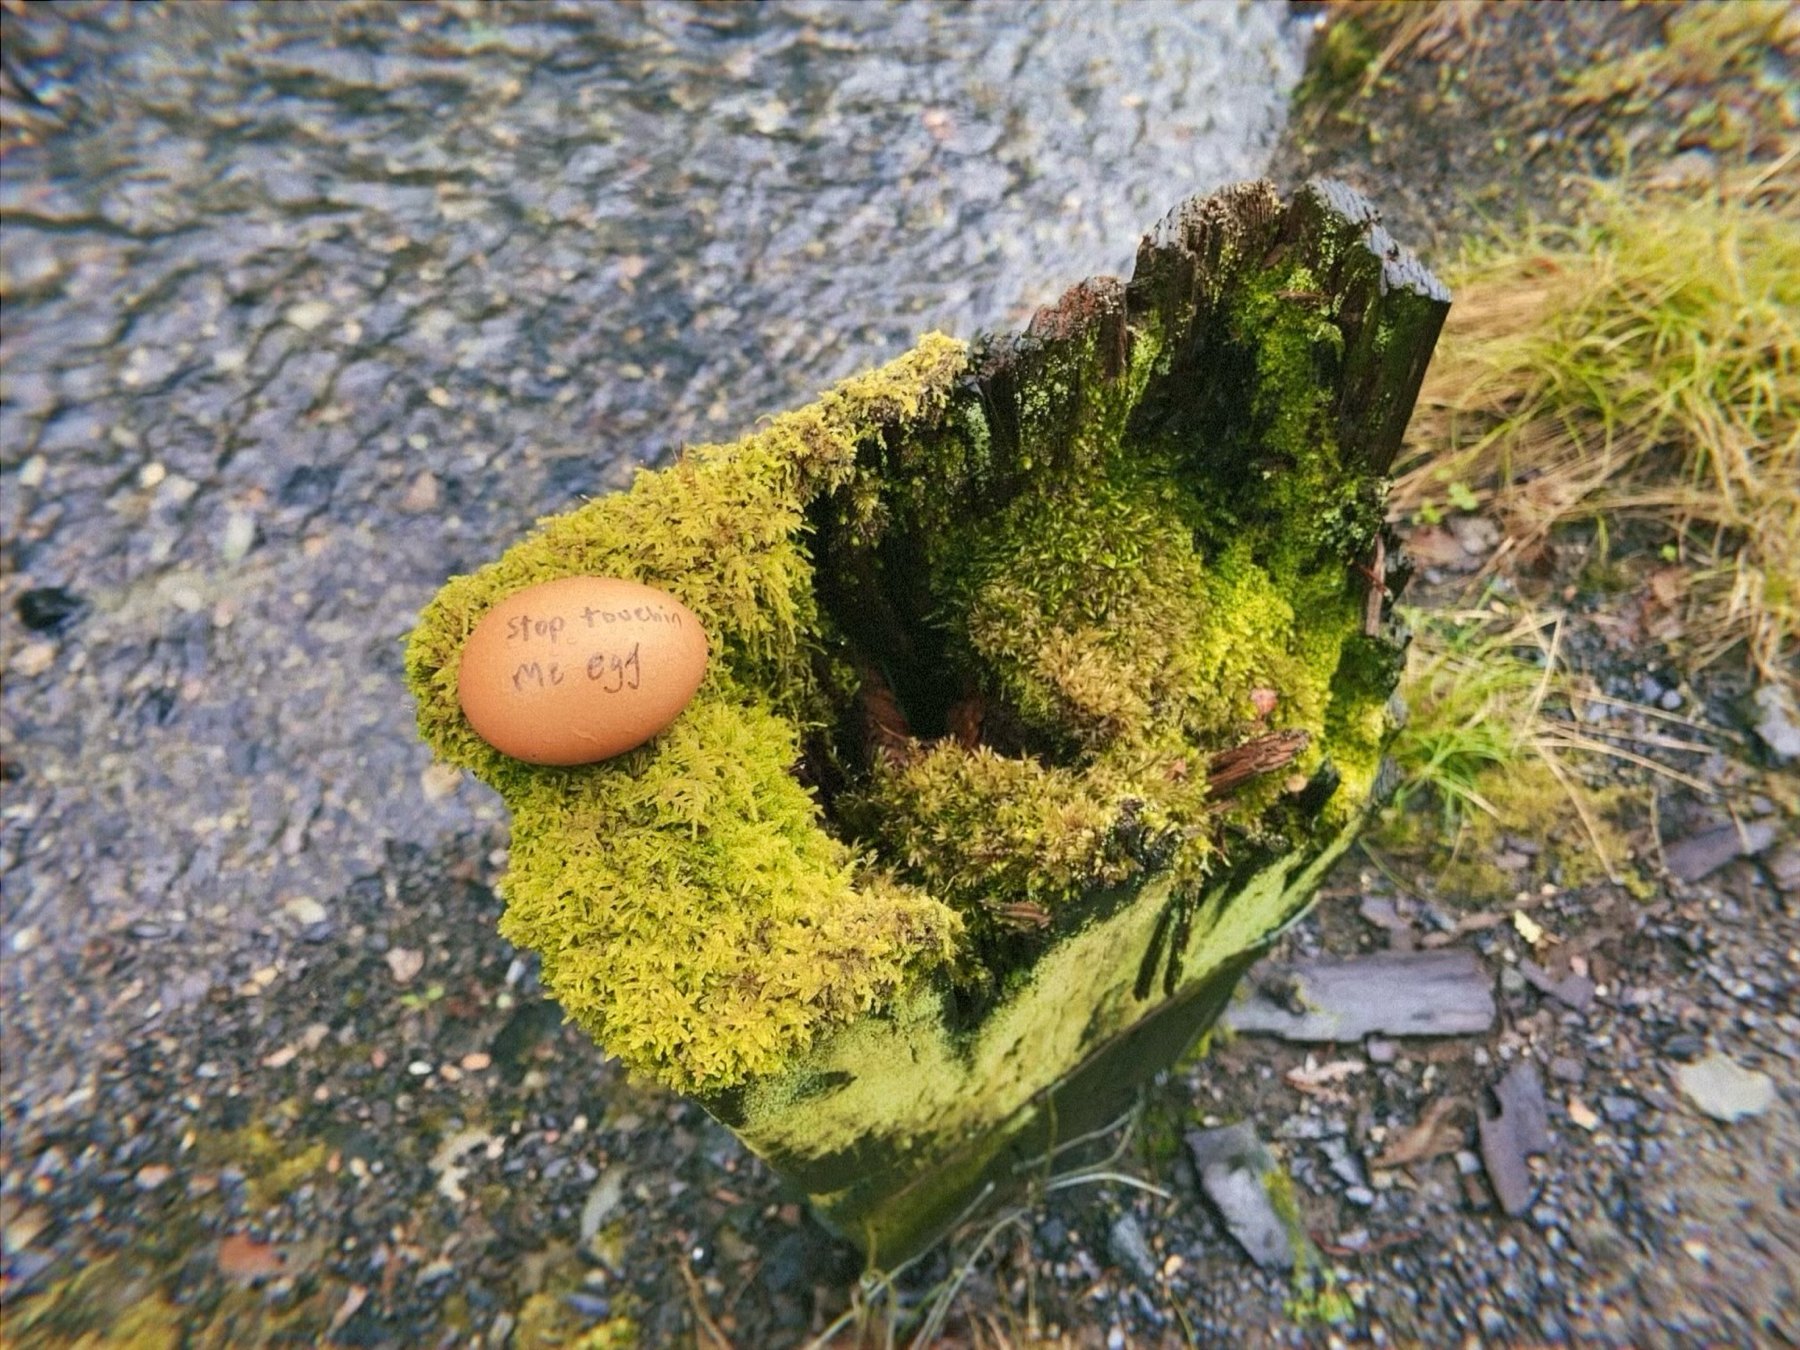 An egg with the phrase Stop touchin me egg written on it, placed on a moss-covered fence post.